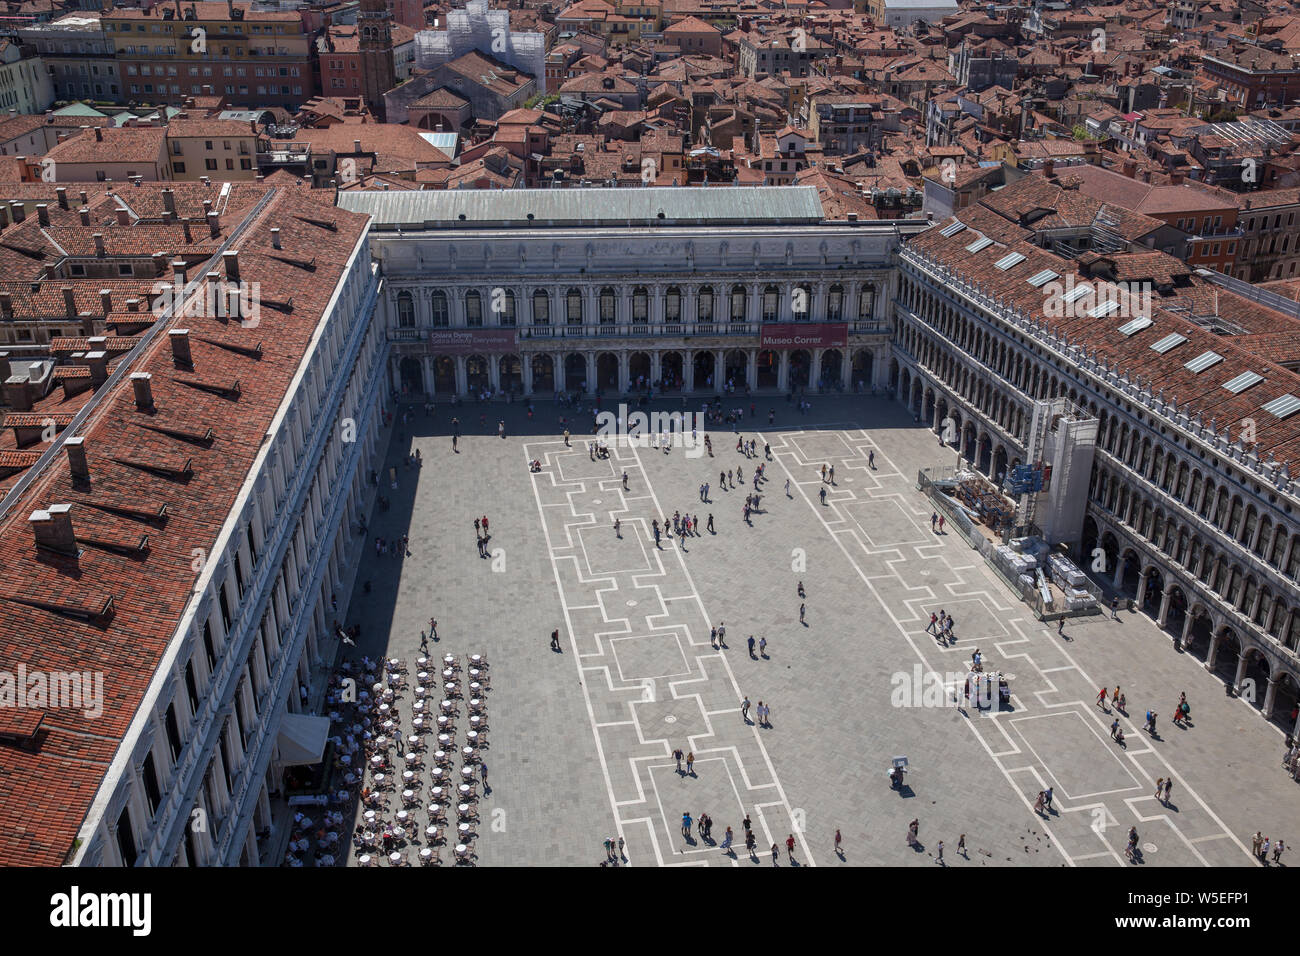 The view from the top of Campanile di San Marco in Piazza San Marco, Venice.St Mark's Campanile is the bell tower of St Mark's Basilica in Venice. Stock Photo